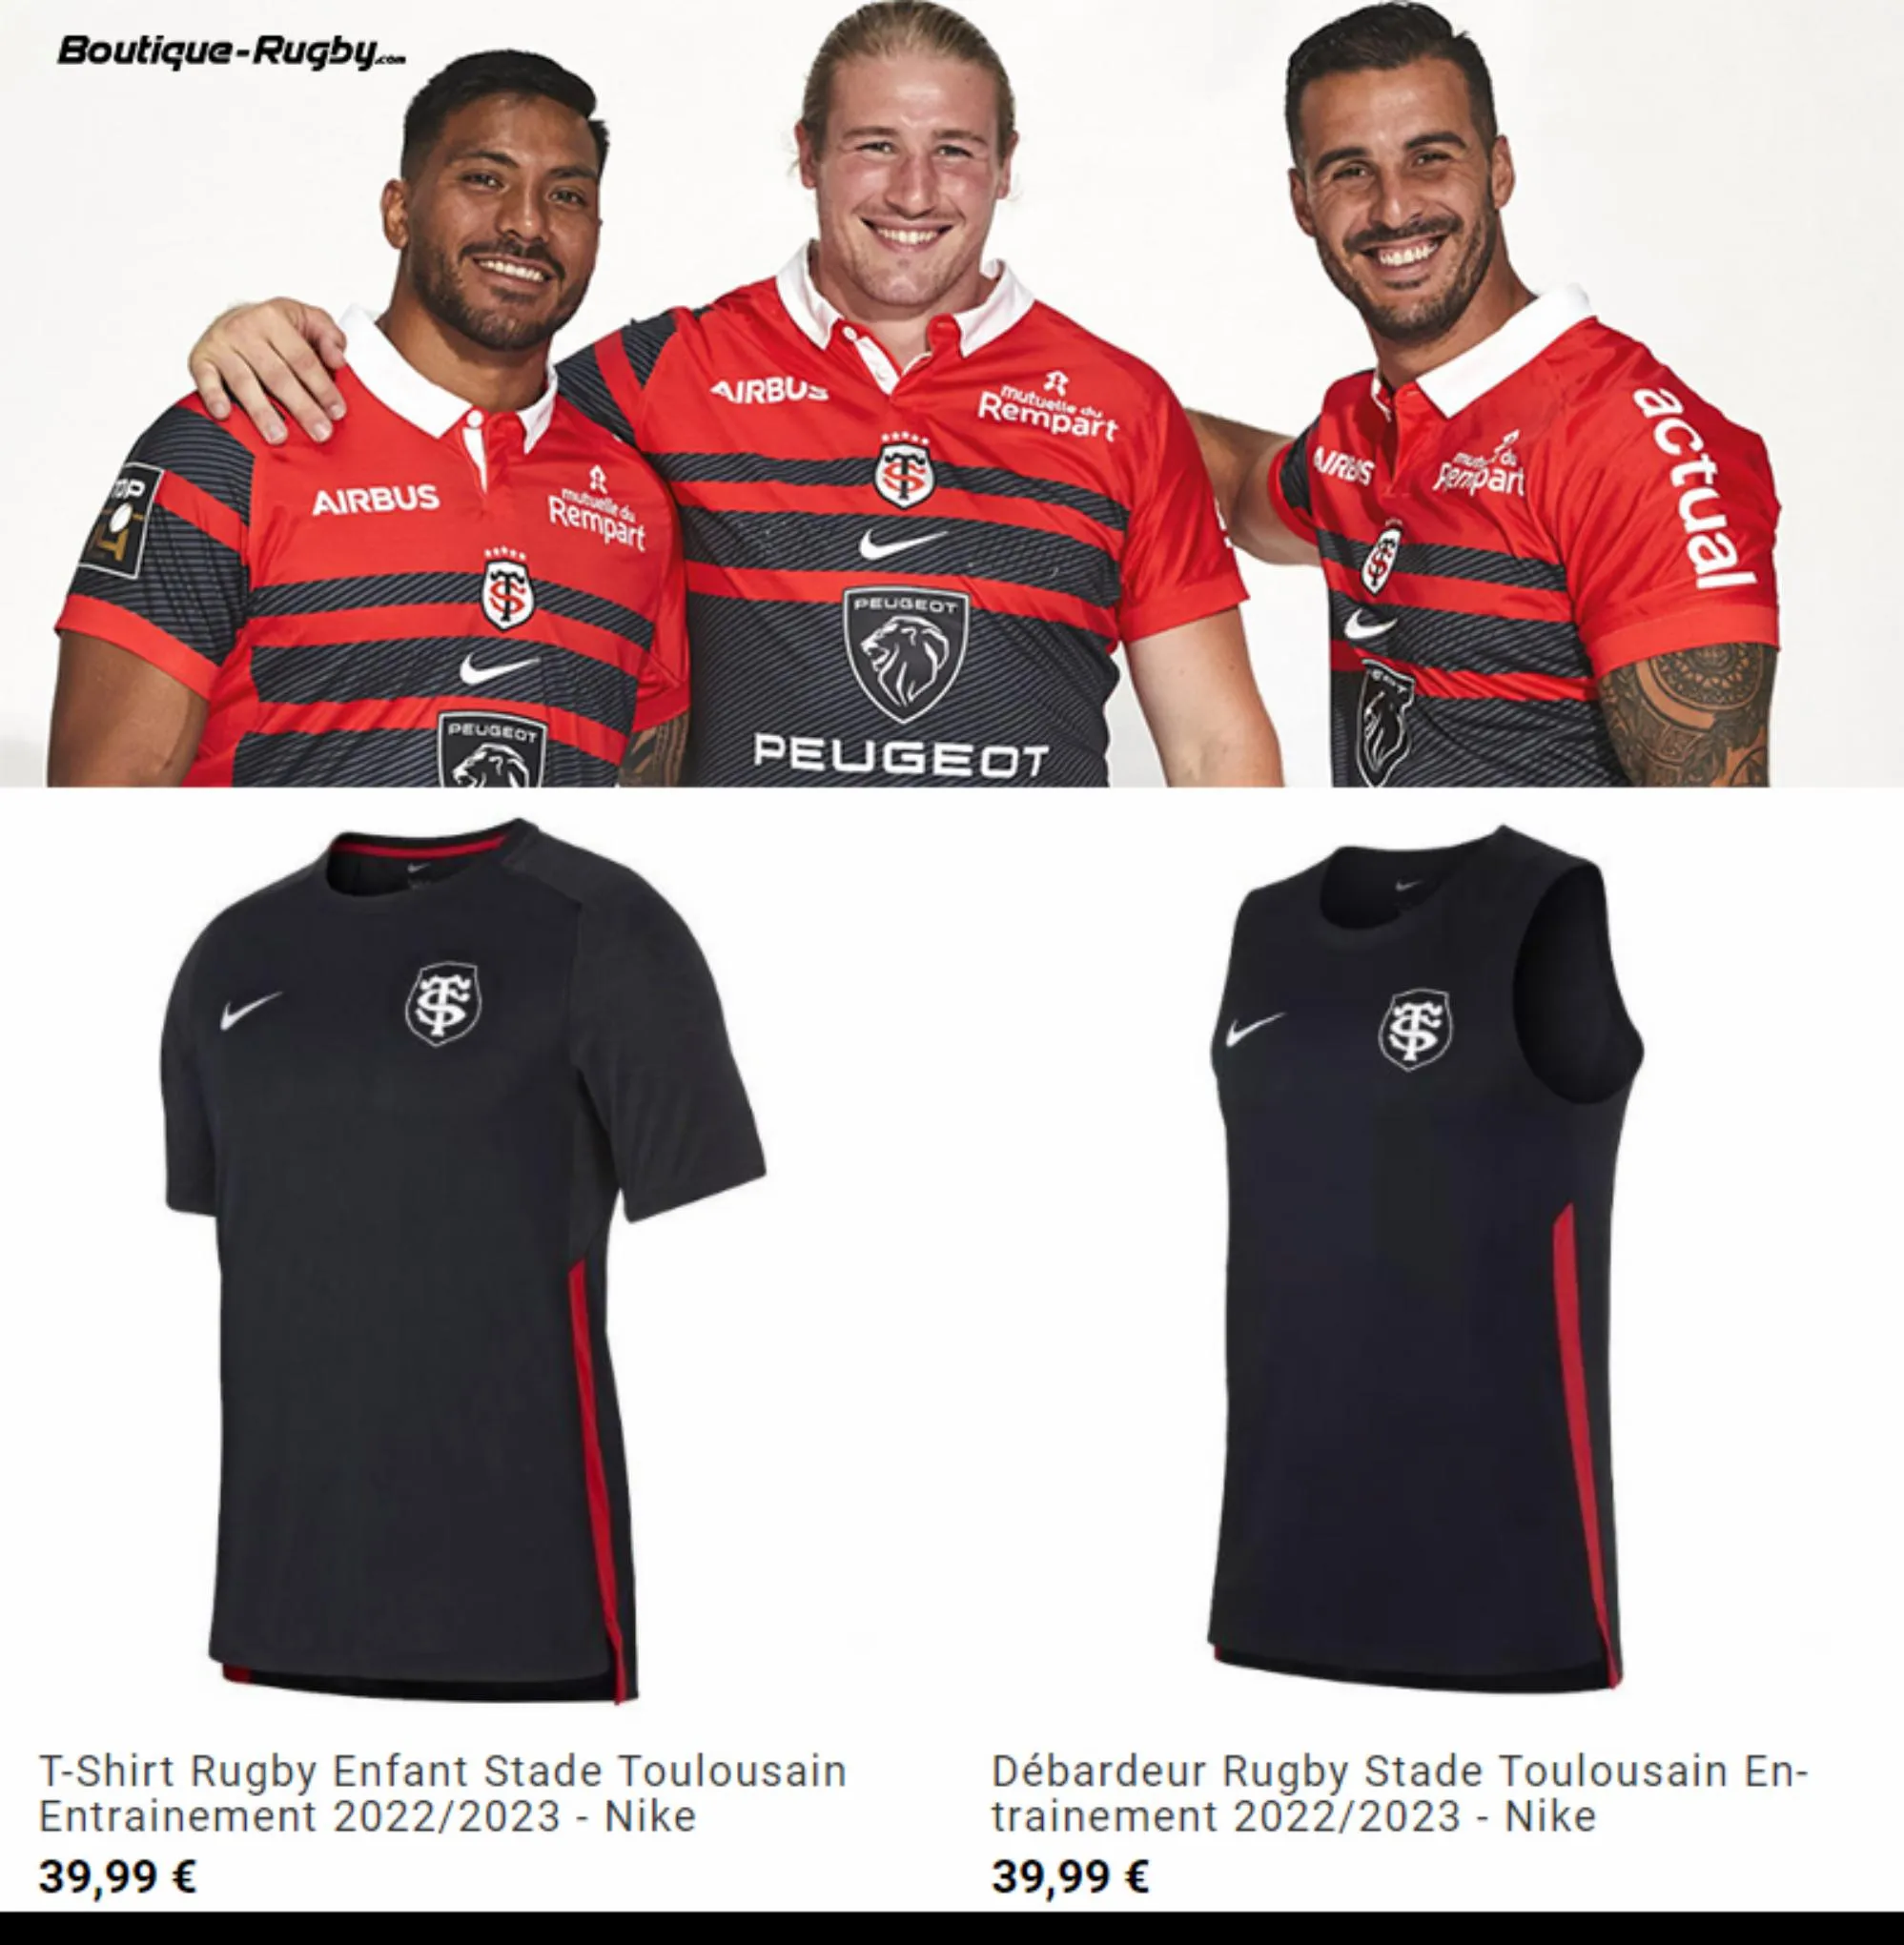 Catalogue Promotions Boutique Rugby, page 00001